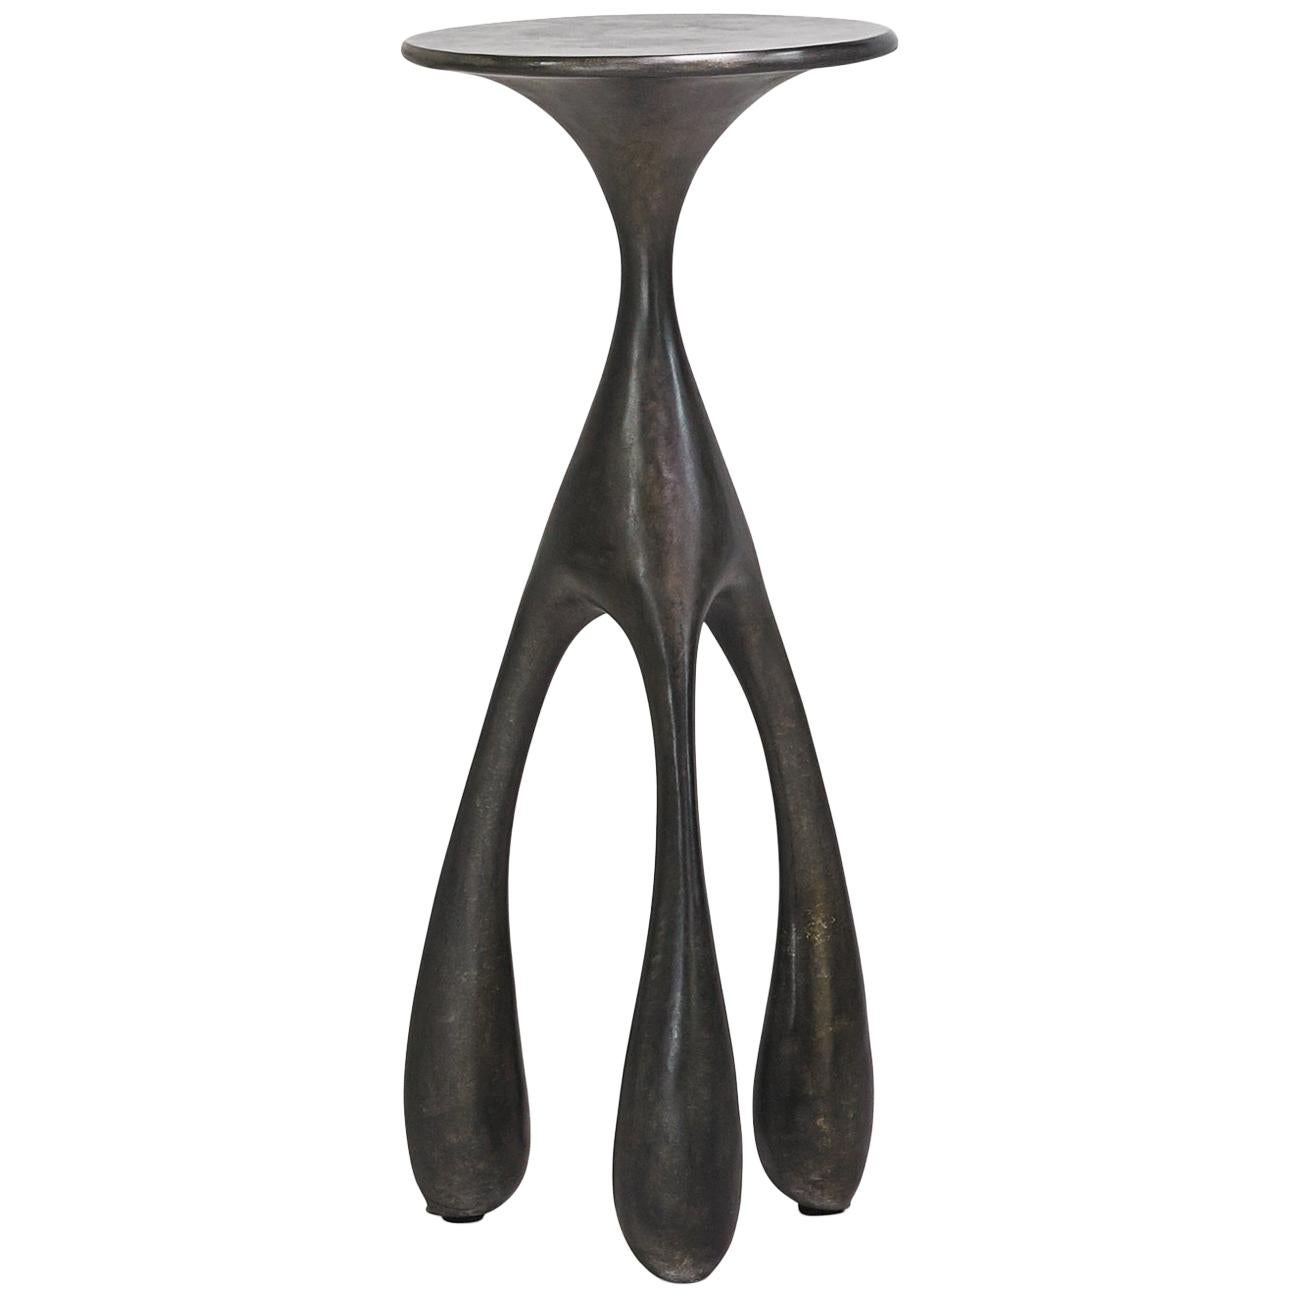 Jordan Mozer (b. 1958), East Gueridon Table / Side Table, Hand Carved, Cast, Recycled Magnesium-Aluminum, Chicago, 2005. Provenance: Collection of the artist. Signed. Measures: 30